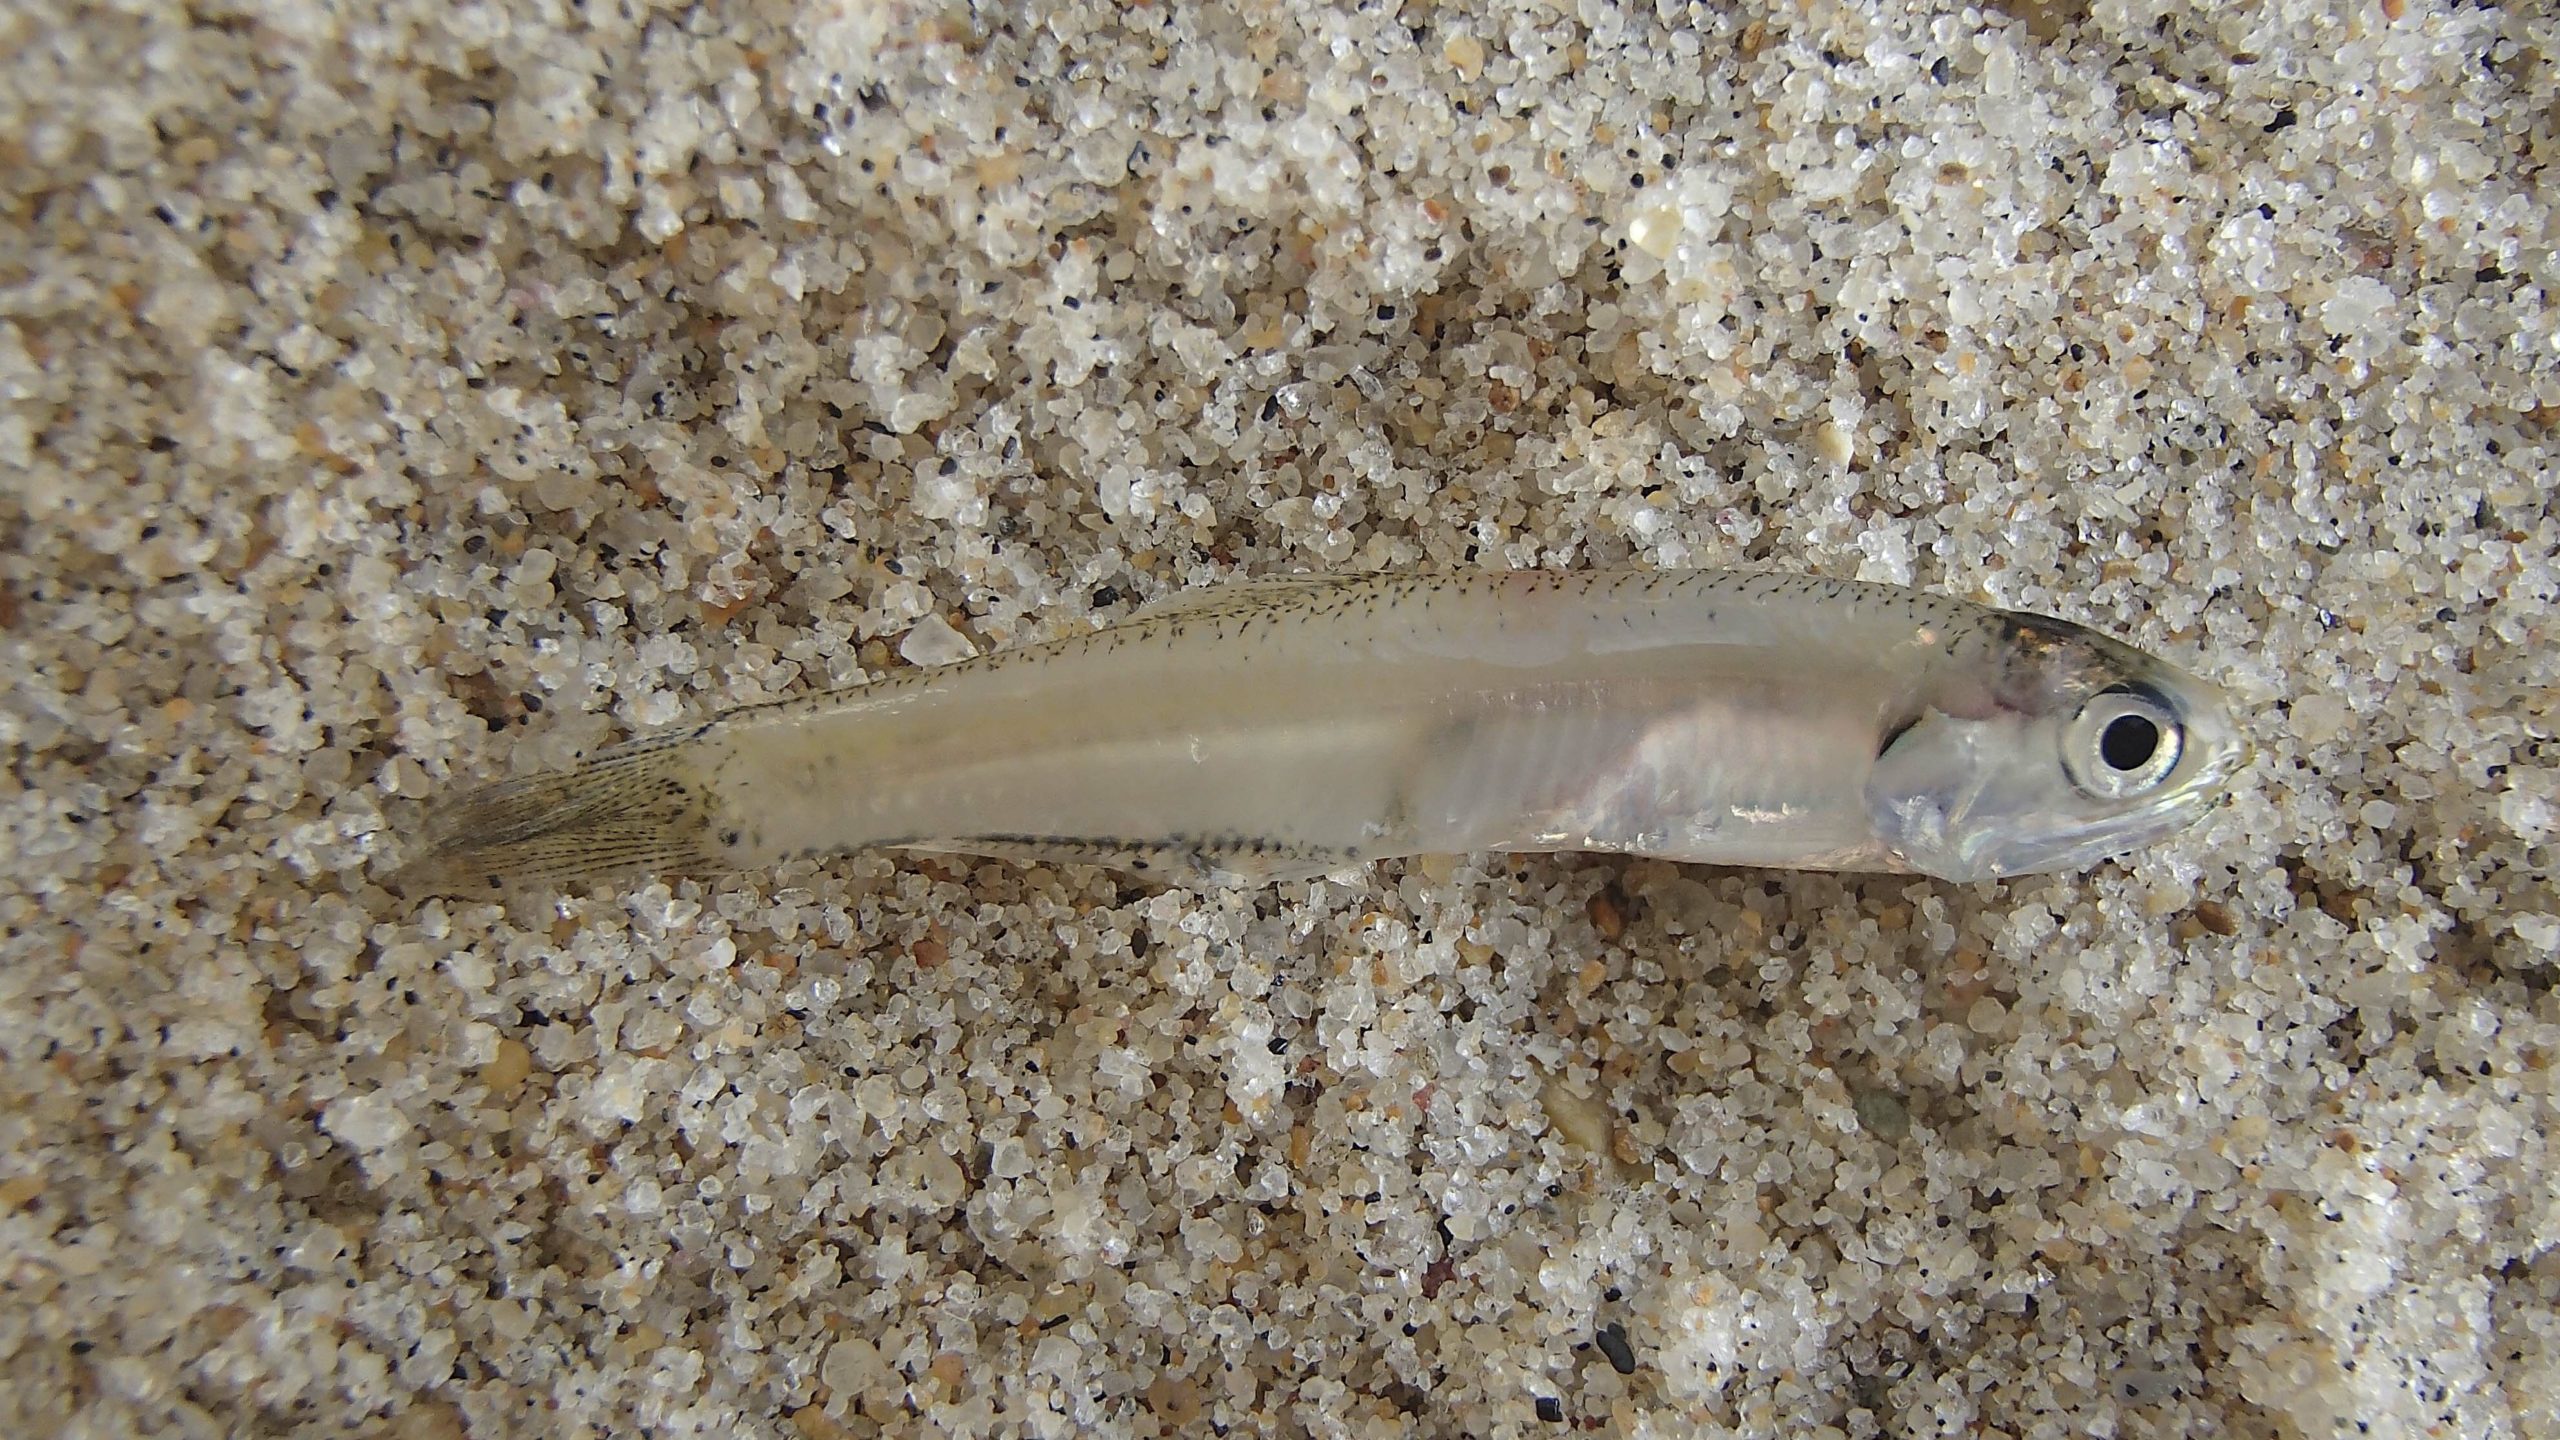 Among the massive schools of bunker in the ocean were schools of young-of-the-year silversides (2”L), hatched in our estuarine marshes this summer.     MIKE BOTTINI